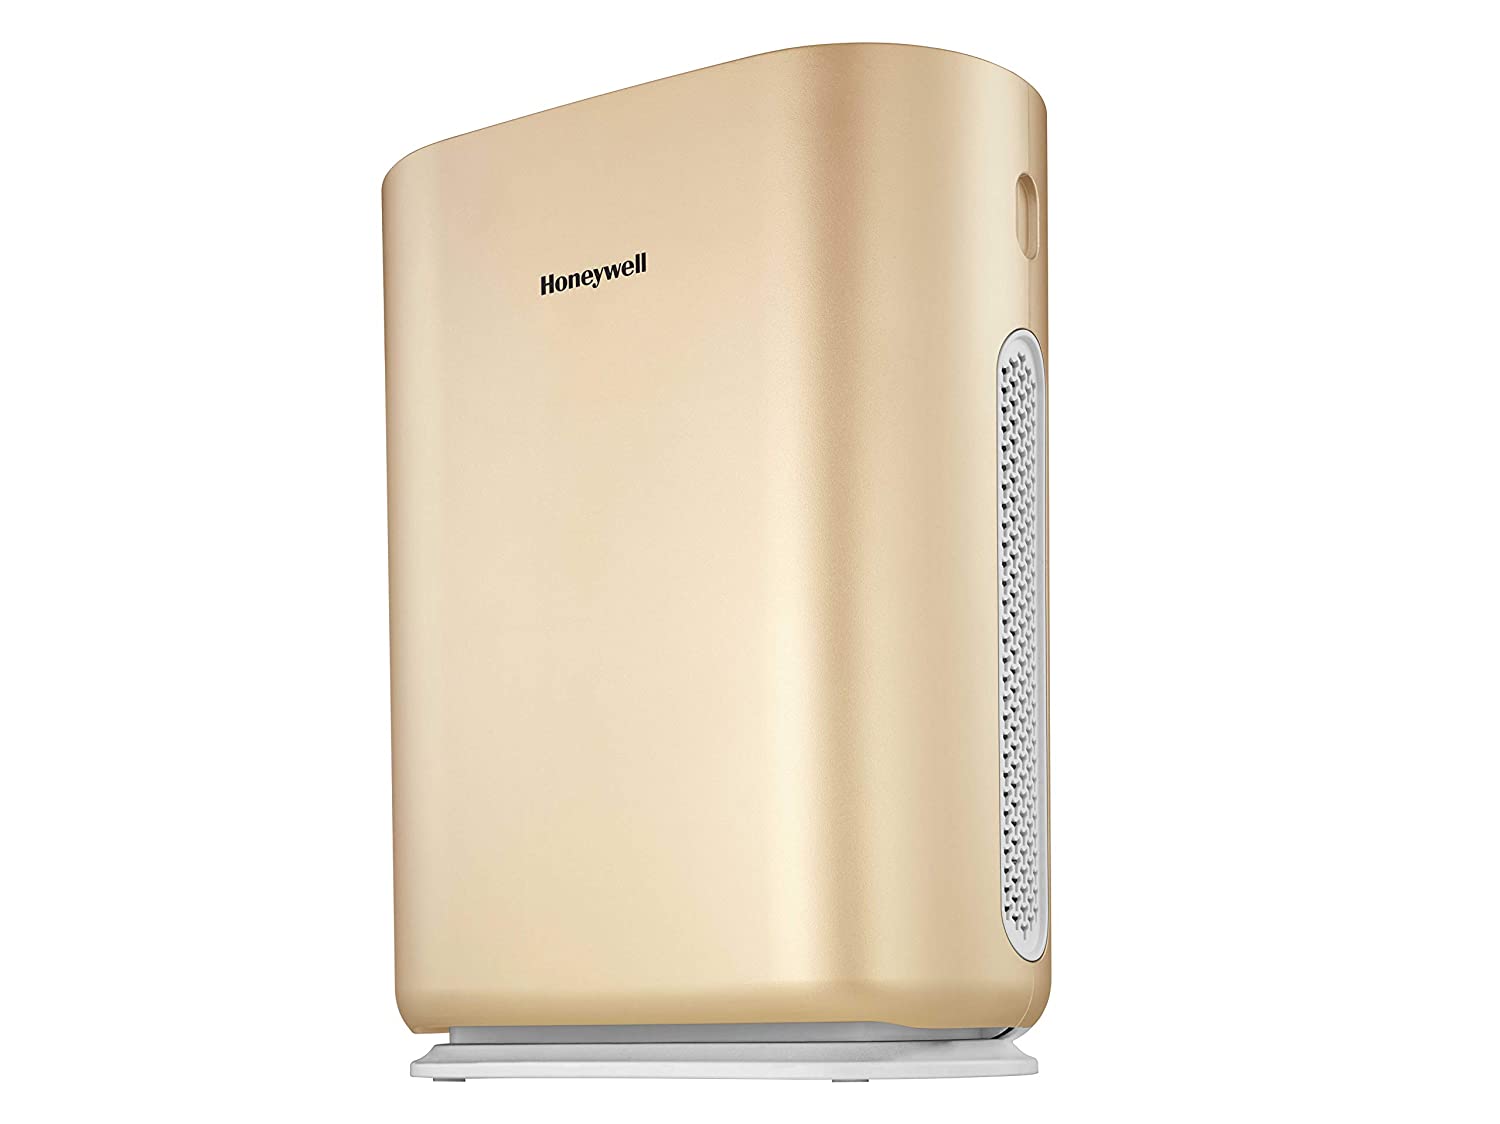 Honeywell Air Touch i8 ( champagne gold) is ozone free 